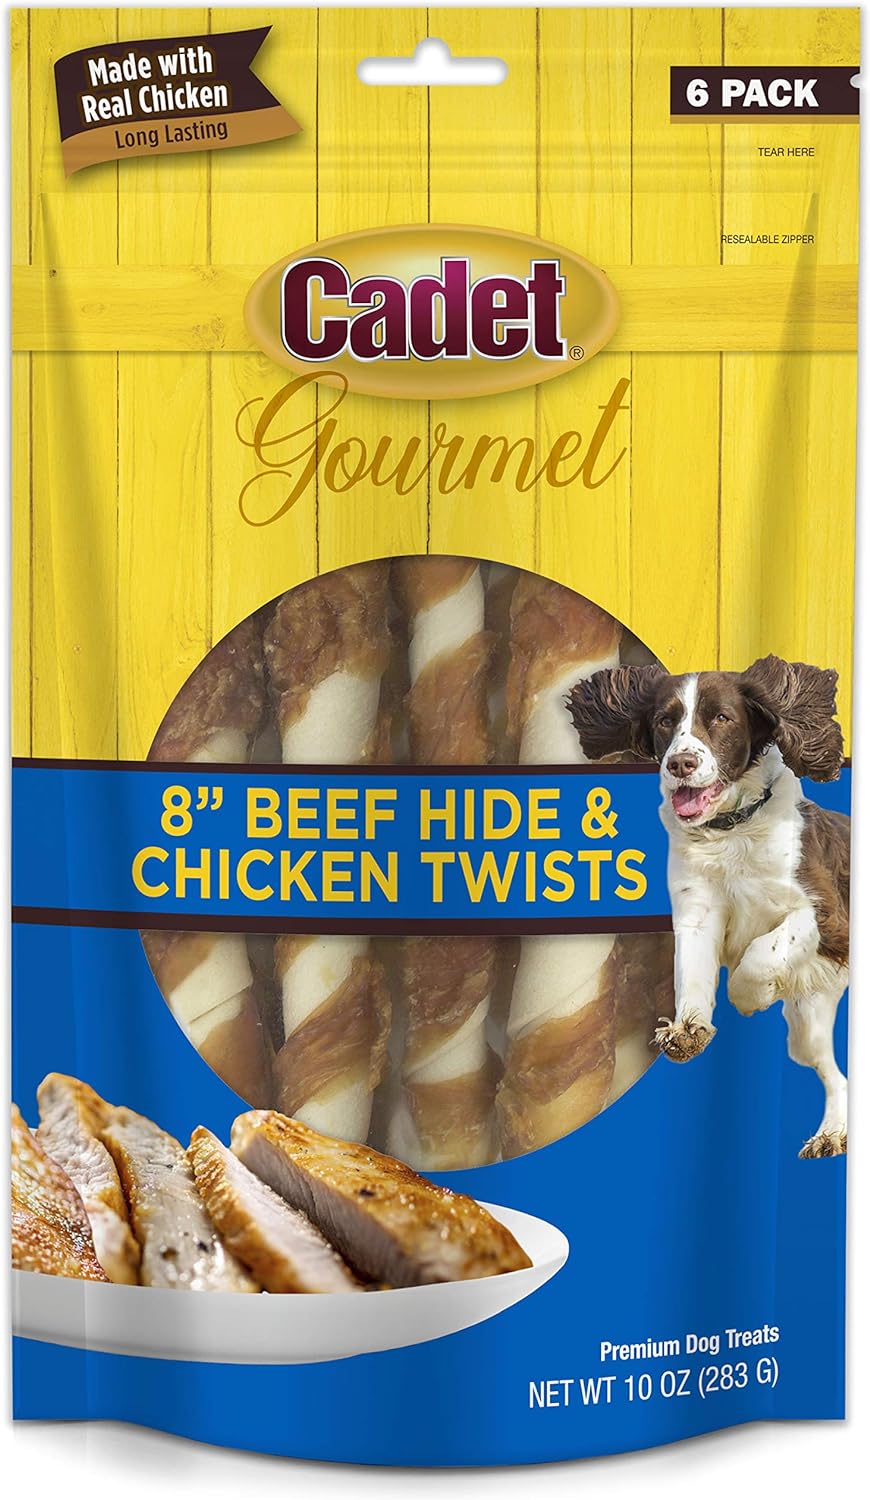 Cadet Gourmet Beef Hide & Chicken Twists Dog Treats - Healthy & Natural Rawhide & Chicken Dog Treats for Small & Large Dogs - Inspected & Tested in USA, 8 In. (6 Count)